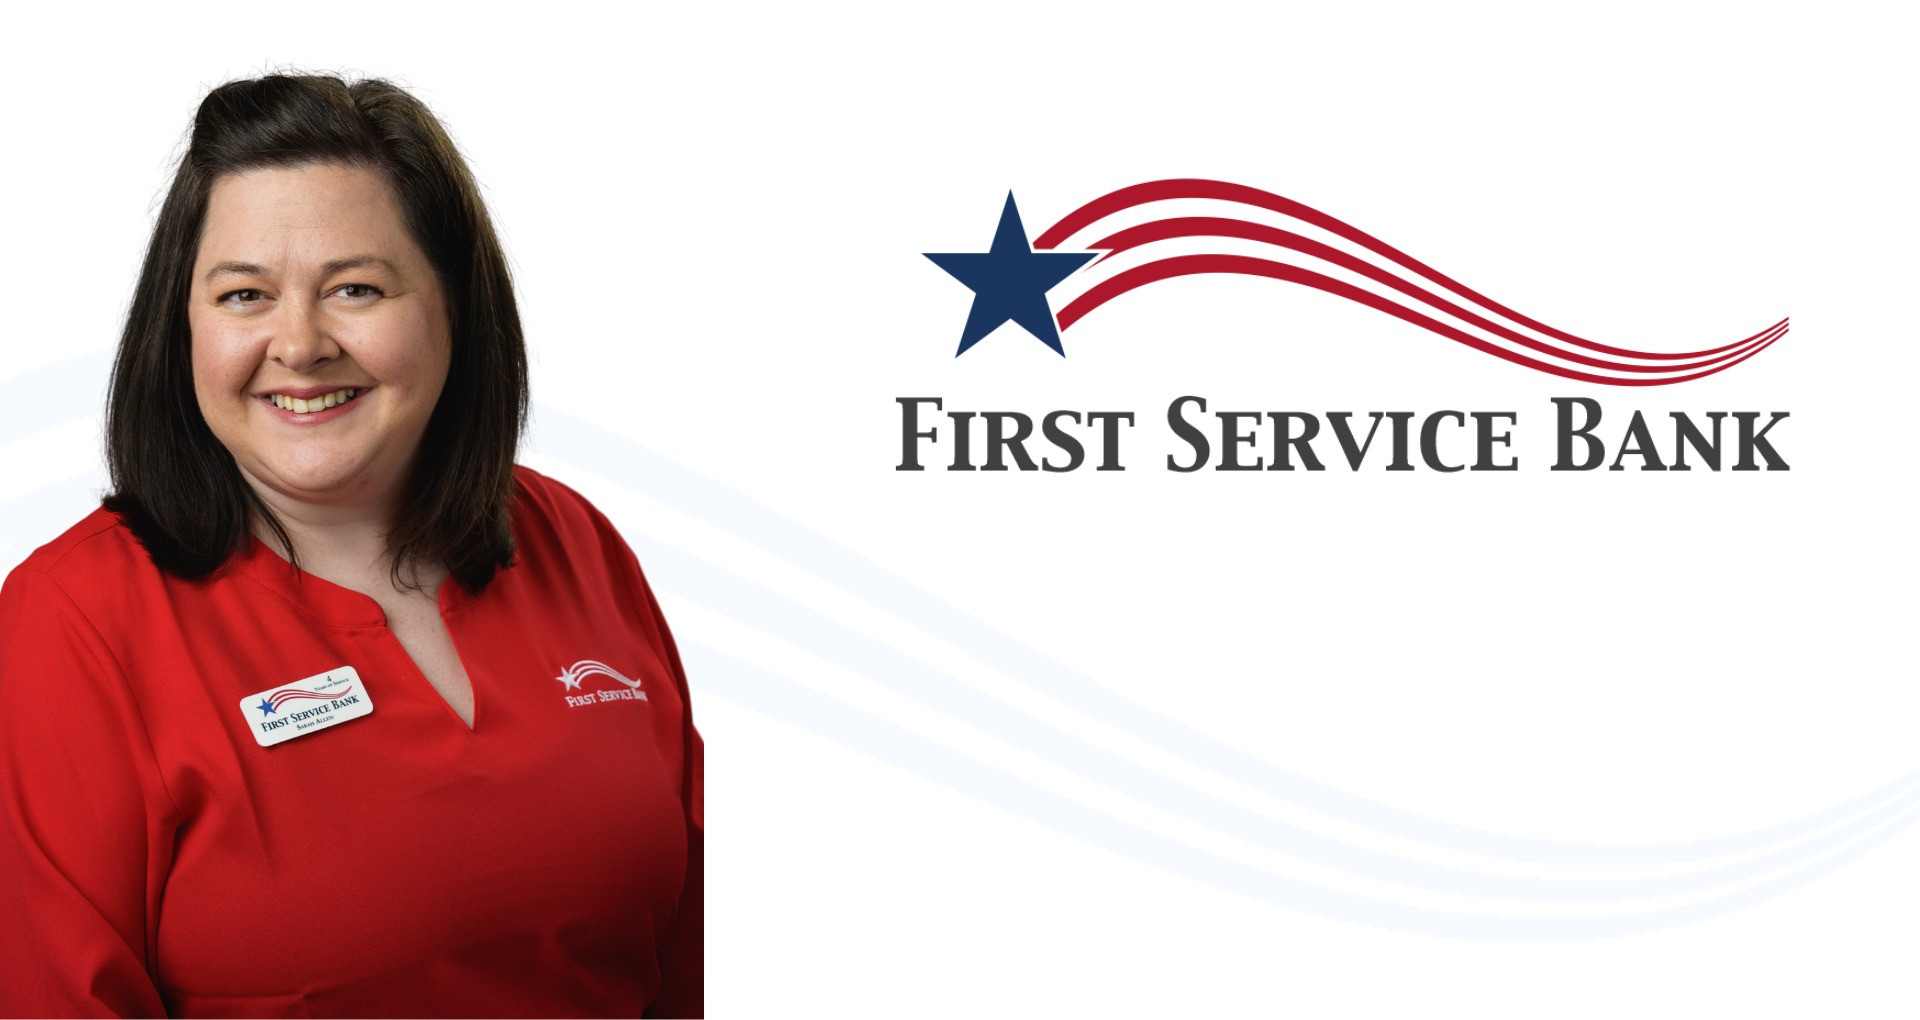 First Service Bank Appoints Sarah Allen as IT Security Officer and Sr. Project Manager